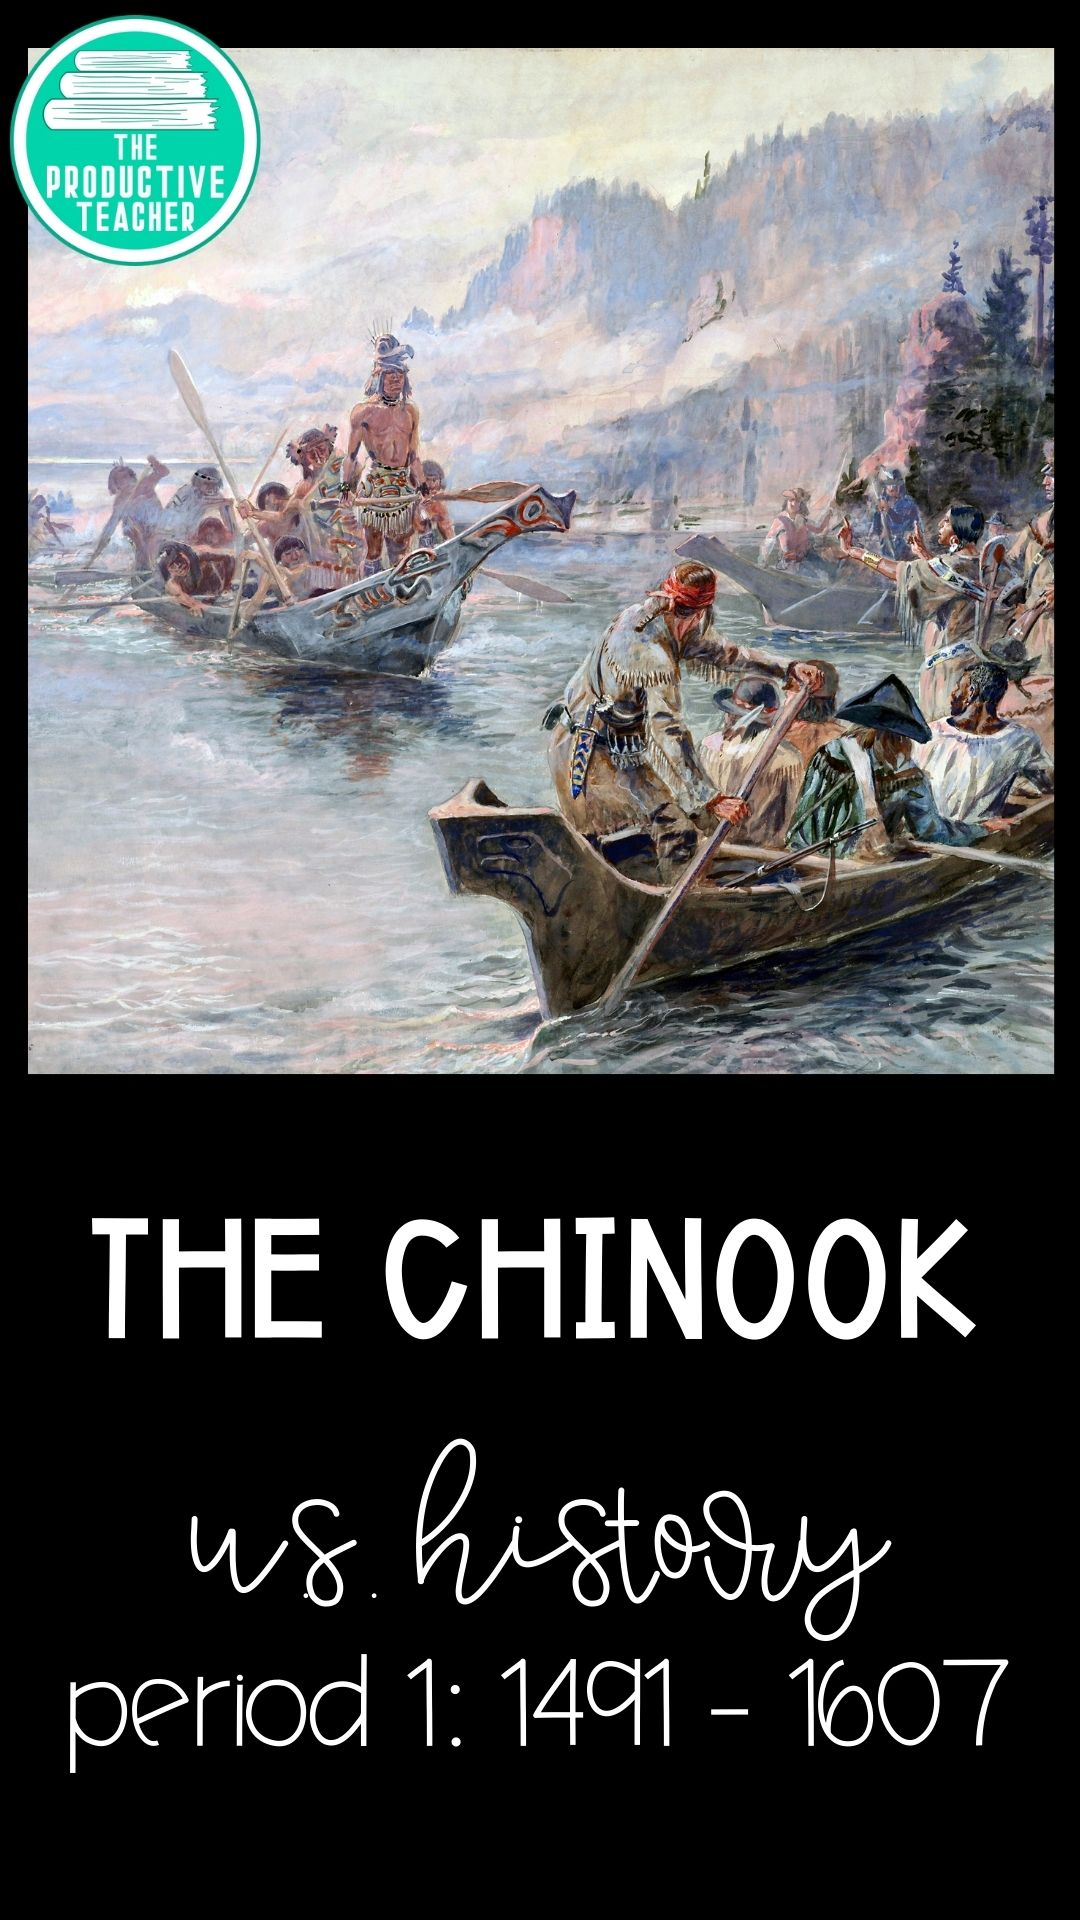 The Chinook for U.S. History